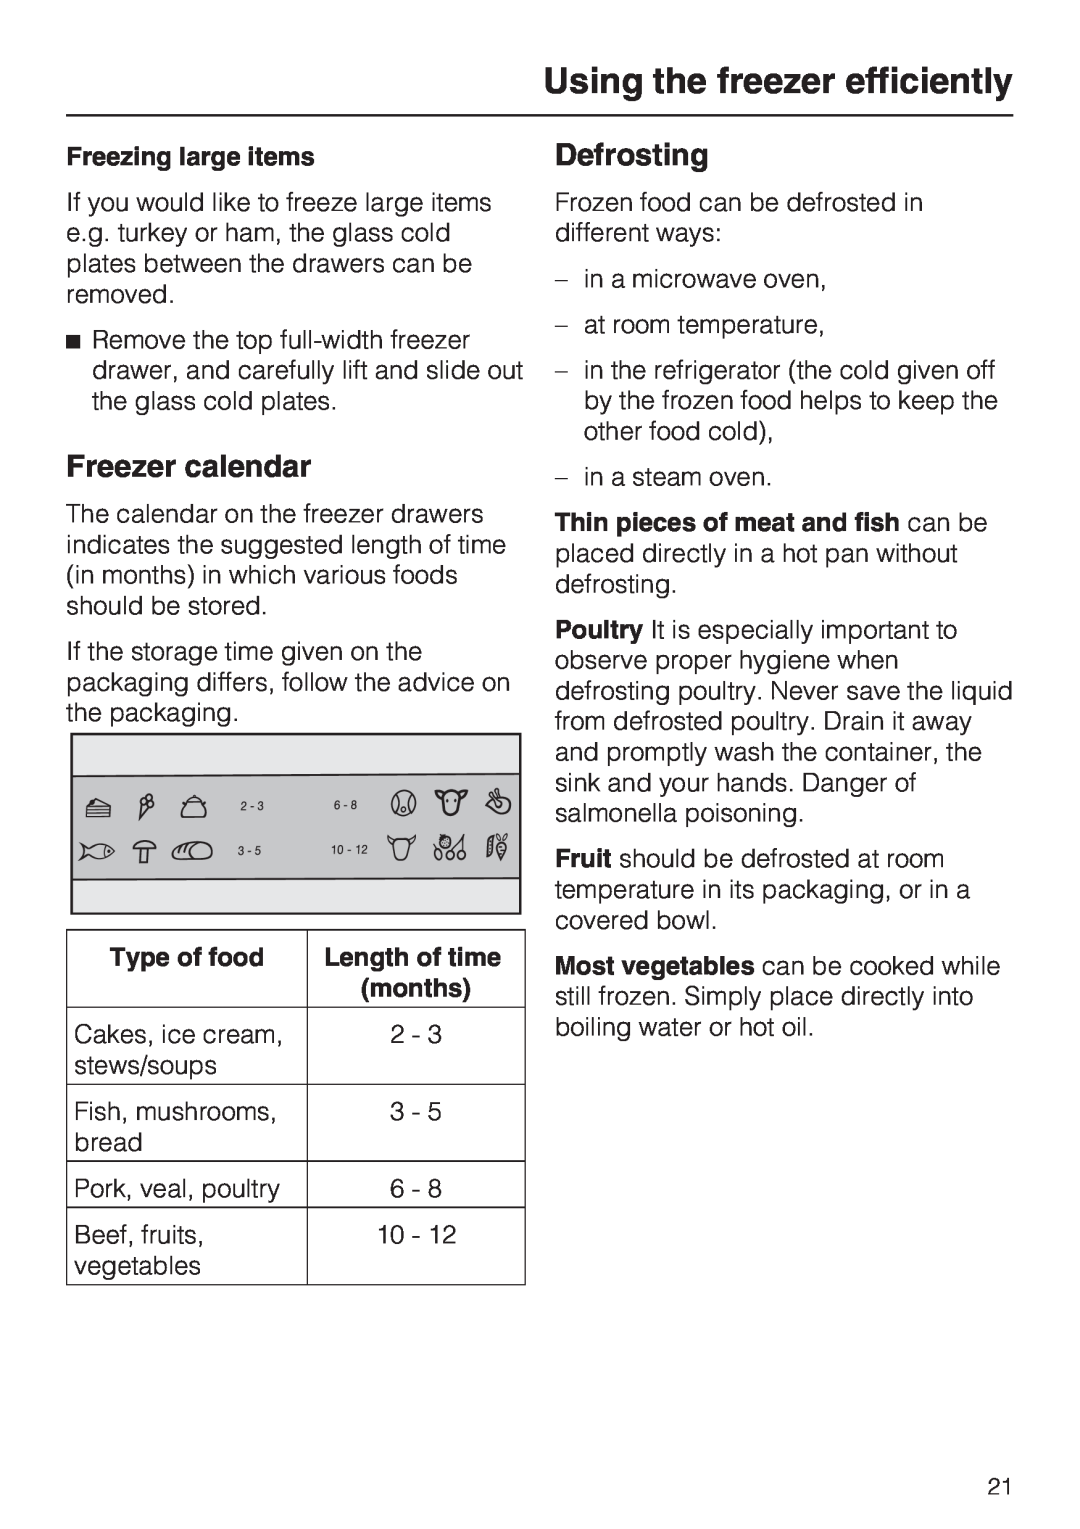 Miele KFN 9755 IDE Freezer calendar, Defrosting, Using the freezer efficiently, Freezing large items, Type of food, months 